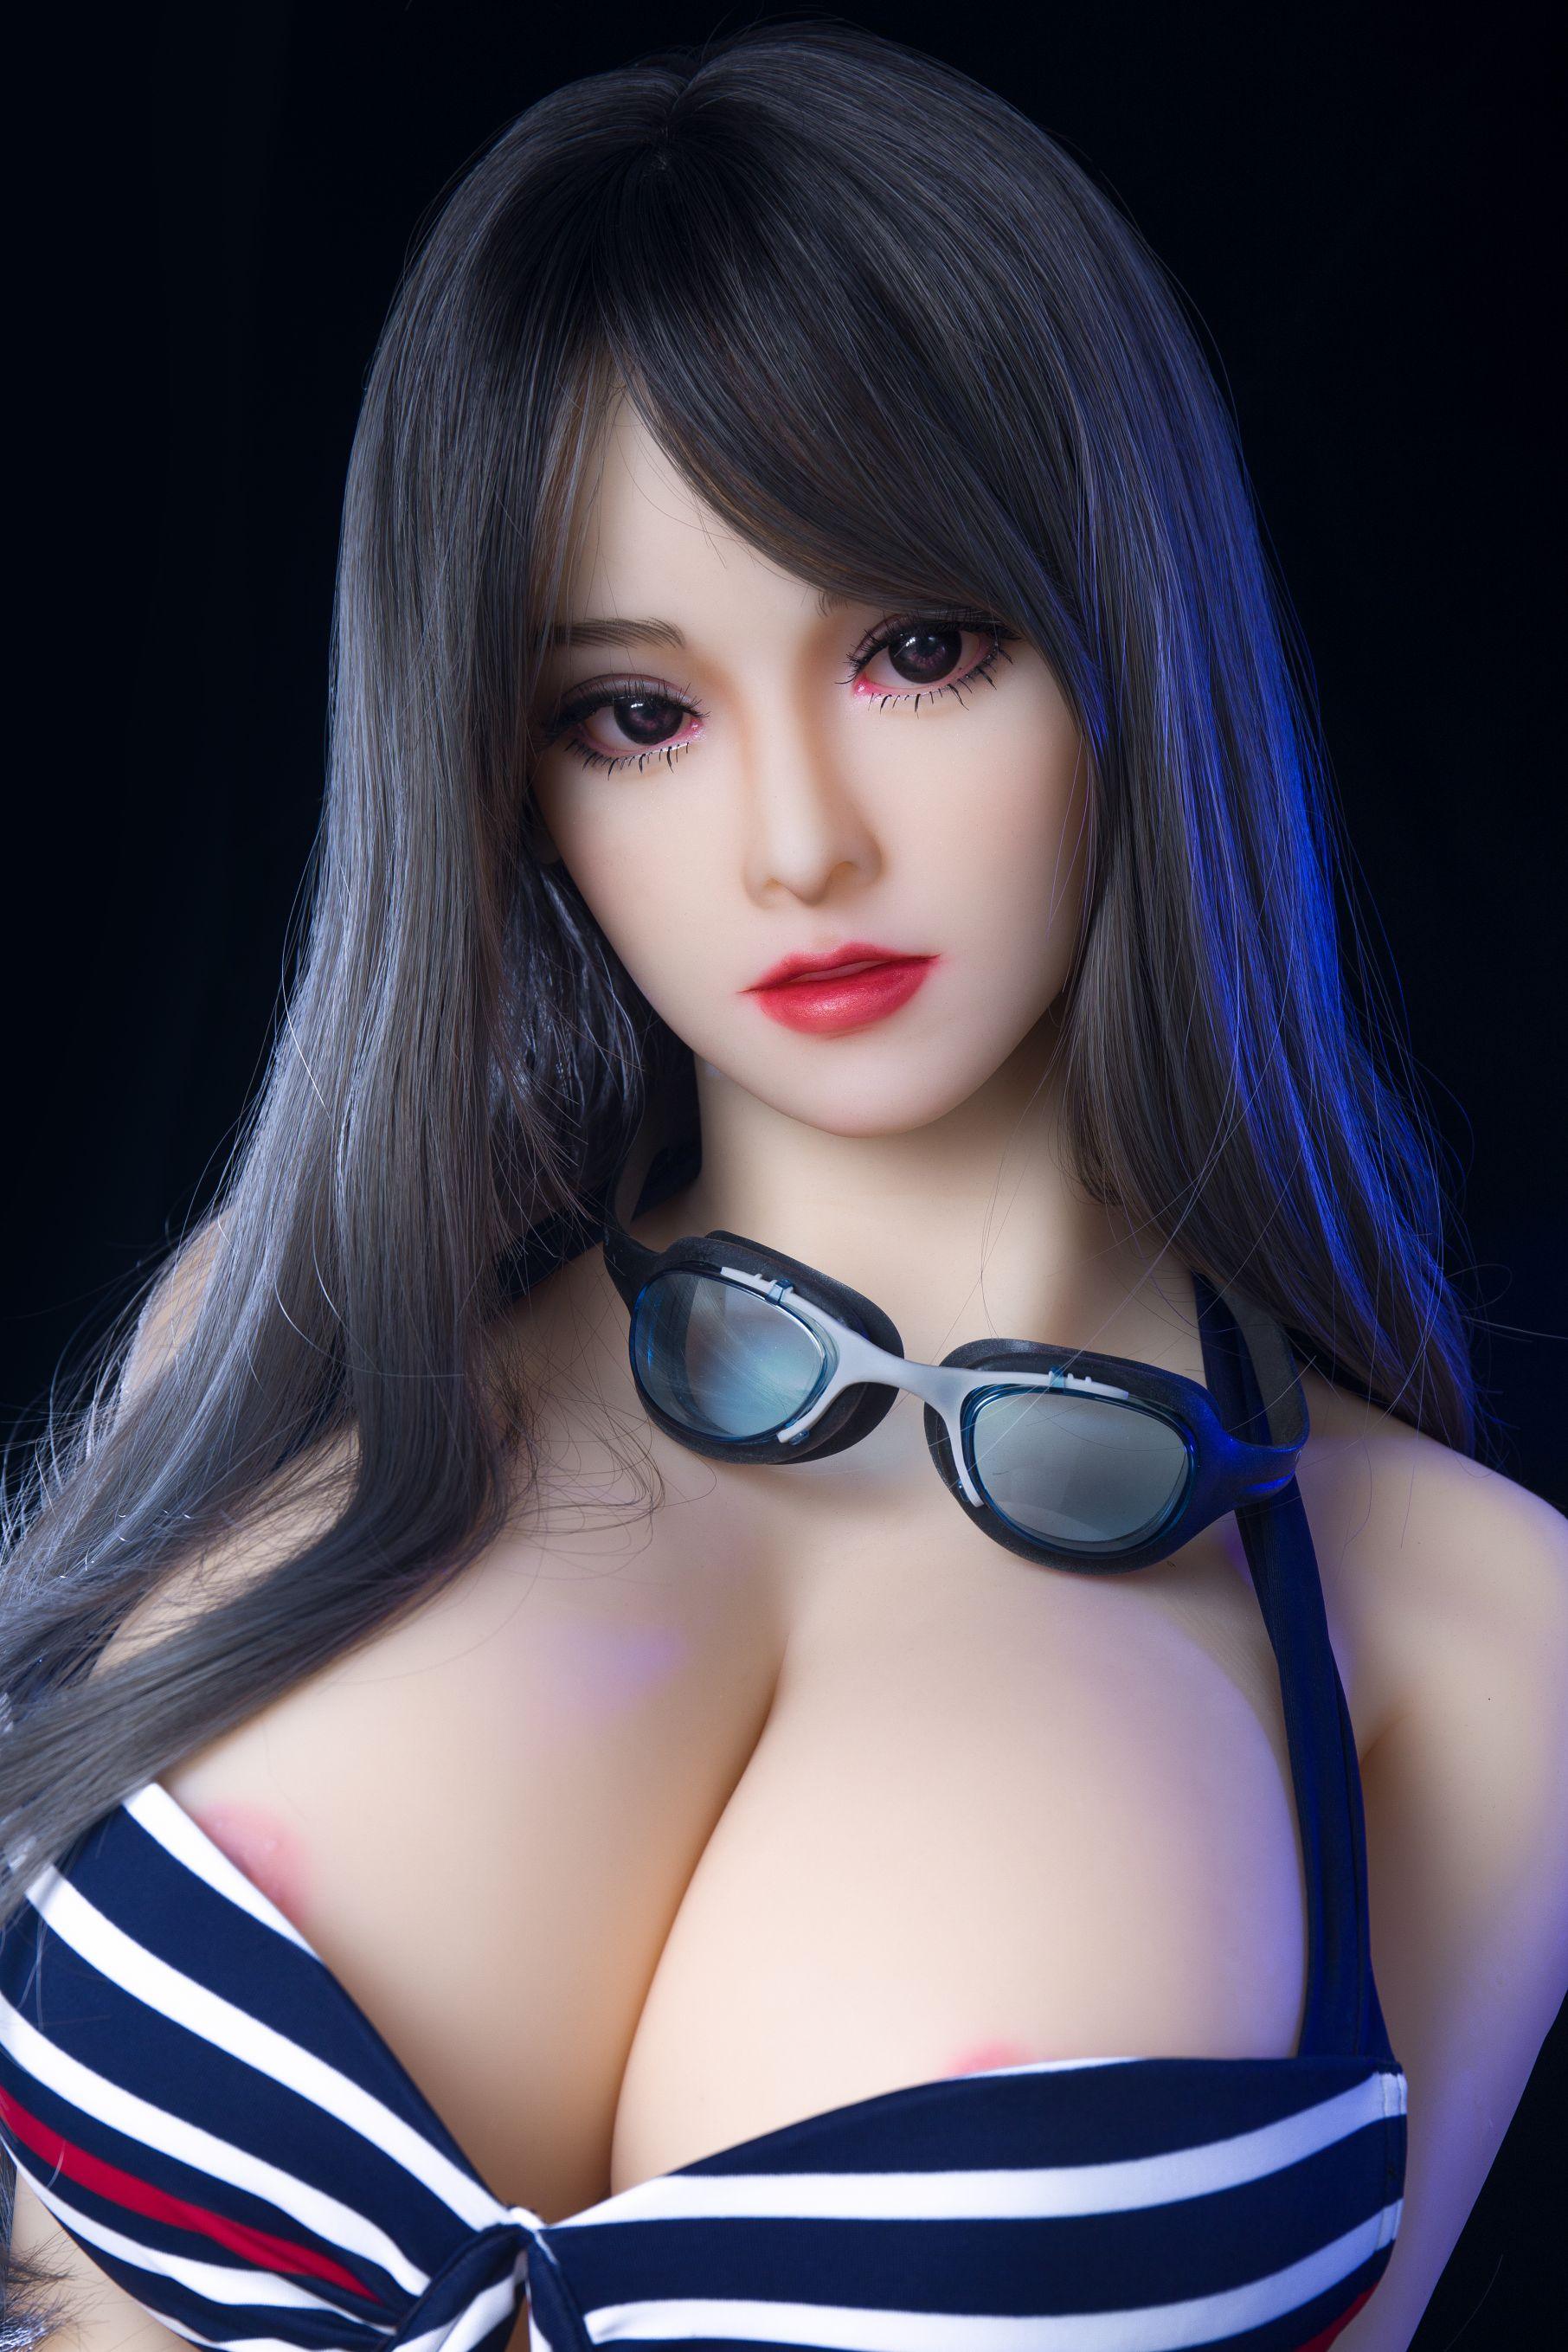 Neodoll Girlfriend Aleena - Sex Doll Head - M16 Compatible - Natural - Lucidtoys